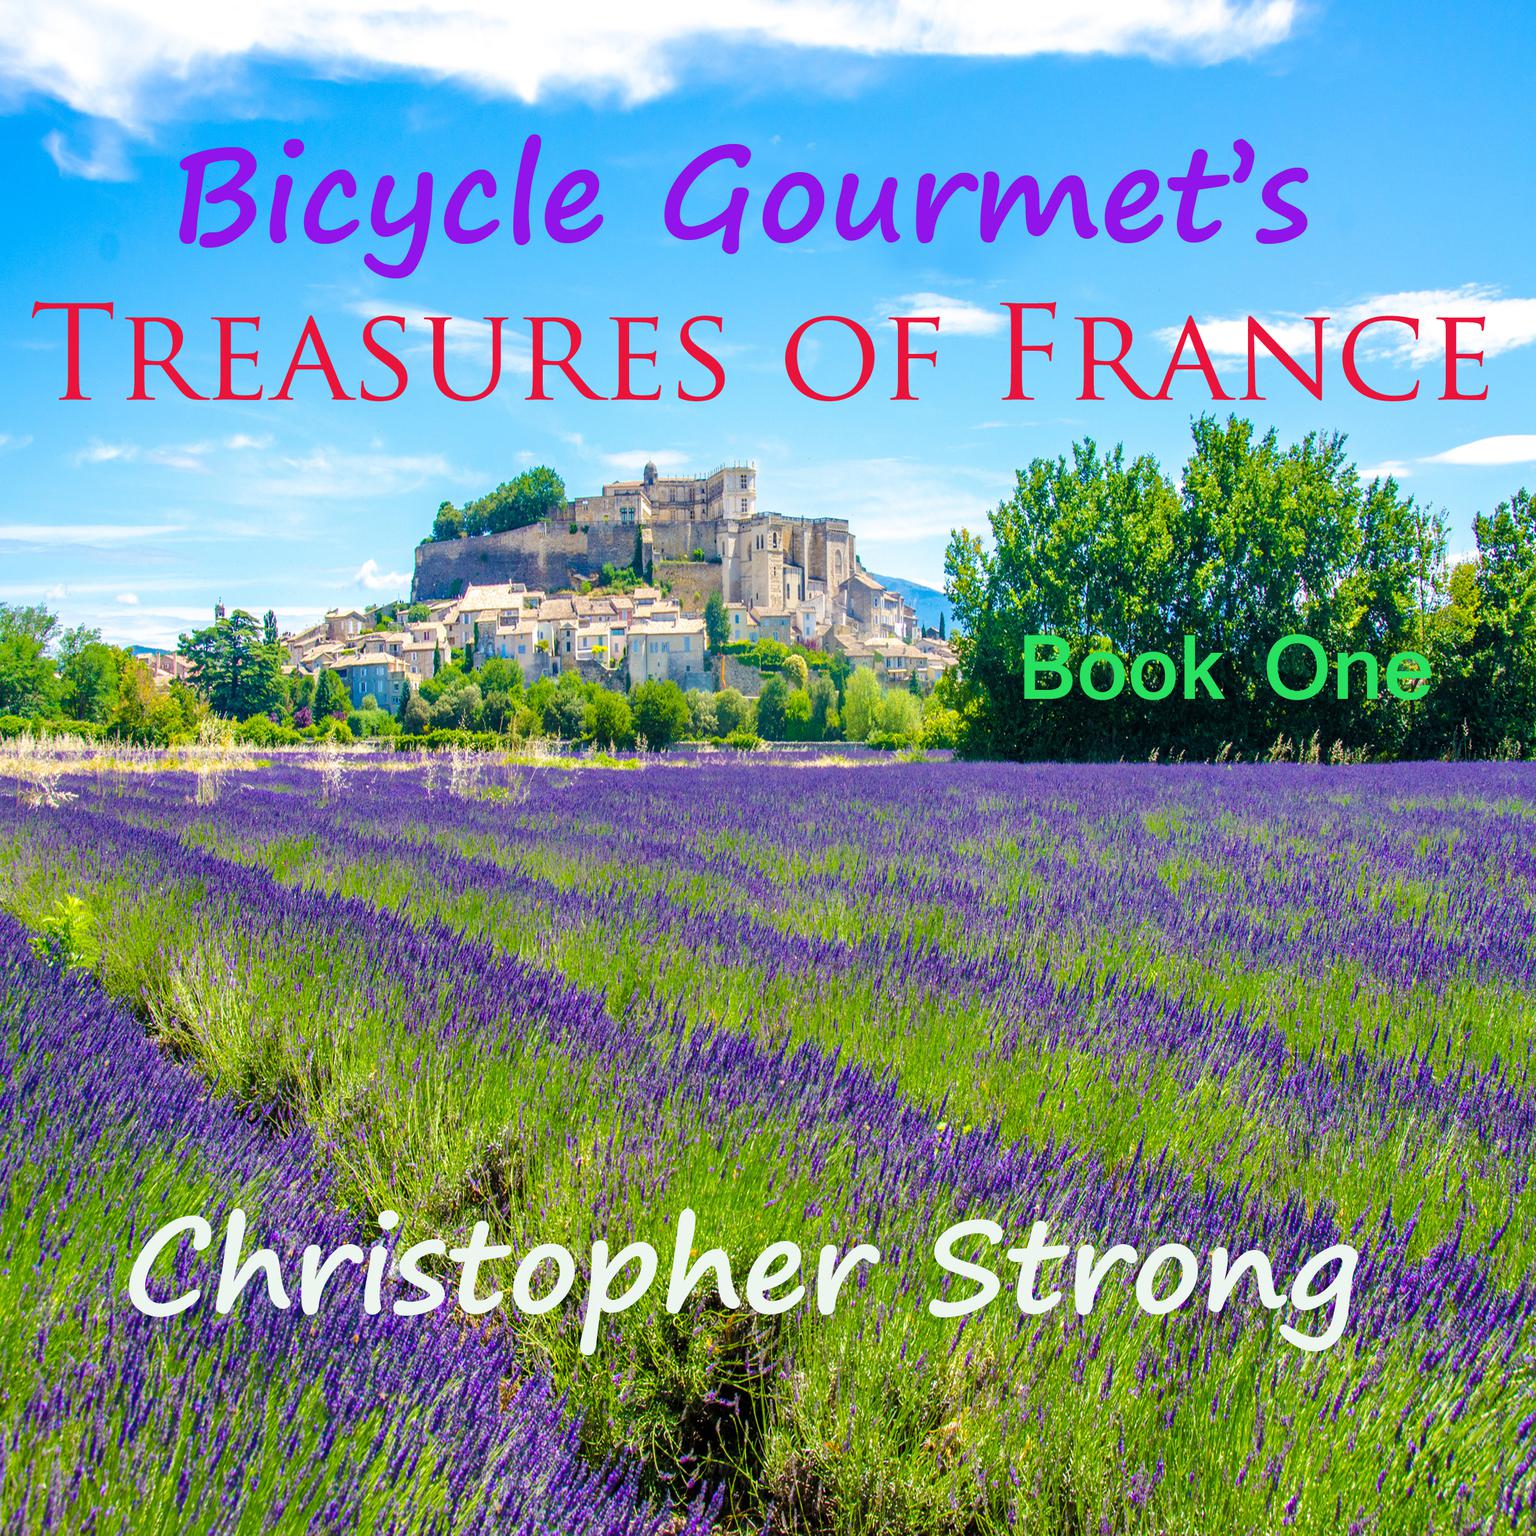 Bicycle Gourmets Treasures of France - Book One Audiobook, by Christopher Strong